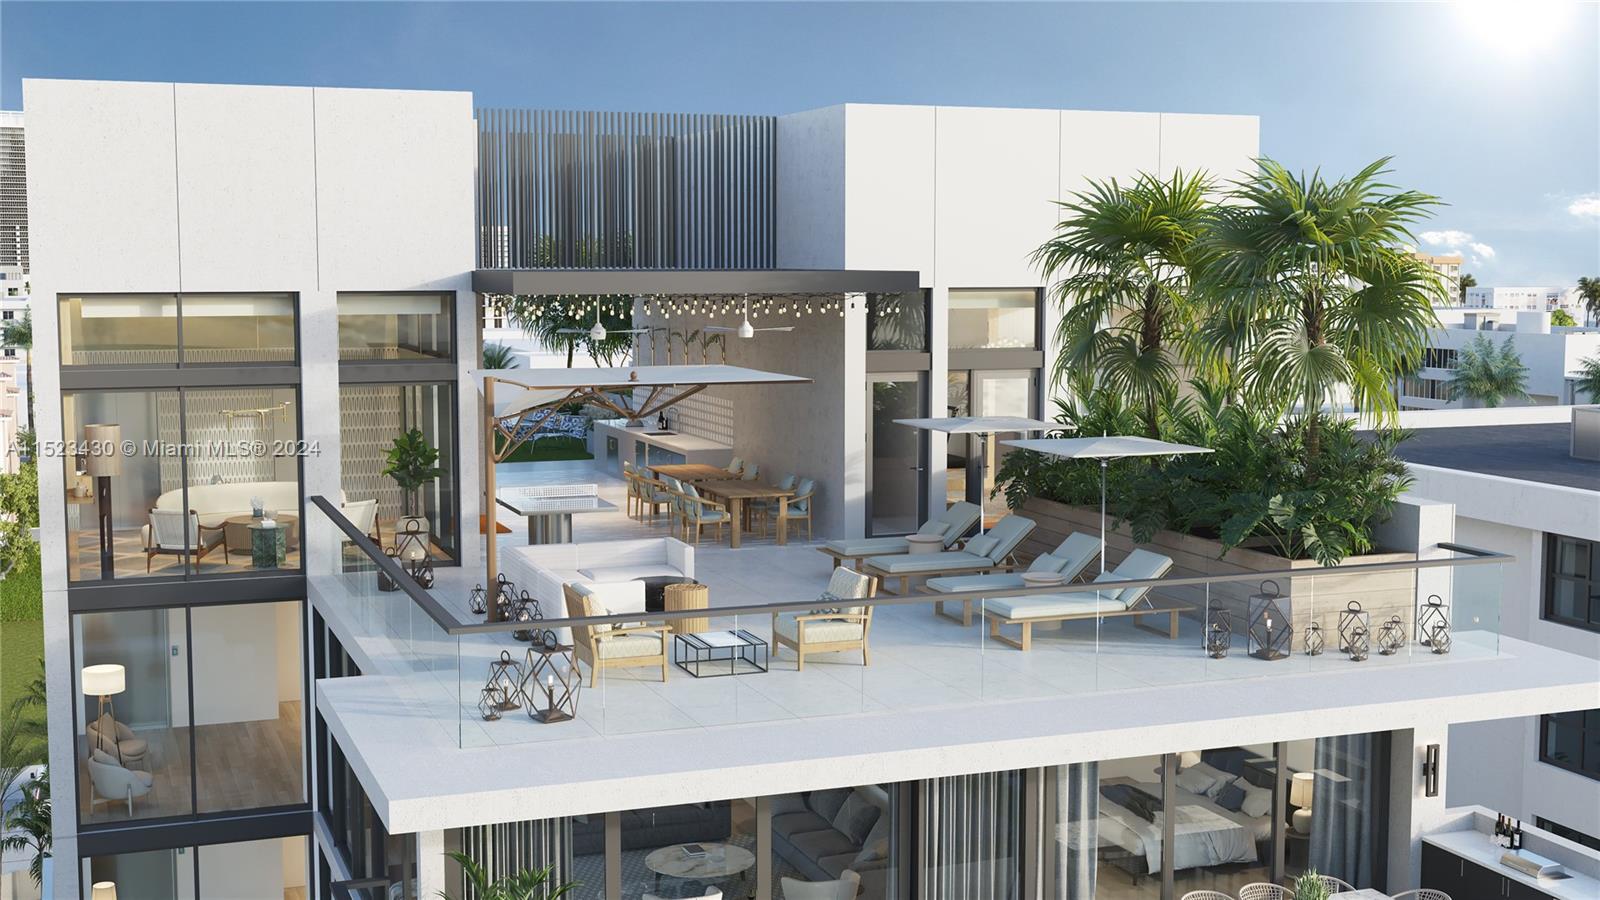 Offering over 6,400 Total SqFt, The Sunset Penthouse at AIRE Residences offers an unrivaled indoor-outdoor lifestyle in the heart of Bay Harbor Islands, Miami. Enjoy mesmerizing views from your 2,970 SqFt private terrace & 3,461 SqFt residence interior. The 5 bed/4.5 bath full-floor home offers spacious & bright living areas and floor-to-ceiling windows throughout. AIRE Residences is an exclusive new 7-story building offering only eight waterfront residences. Enjoy an expansive rooftop with outdoor dining & entertainment areas including a yoga & meditation lawn & fitness room. All within walking distance to the best of Miami: Beaches, dining, shopping & entertainment. The Sunset Penthouse includes 2 parking spaces & a private dock space for a 35-ft vessel. Targeted Completion Q1 2026.